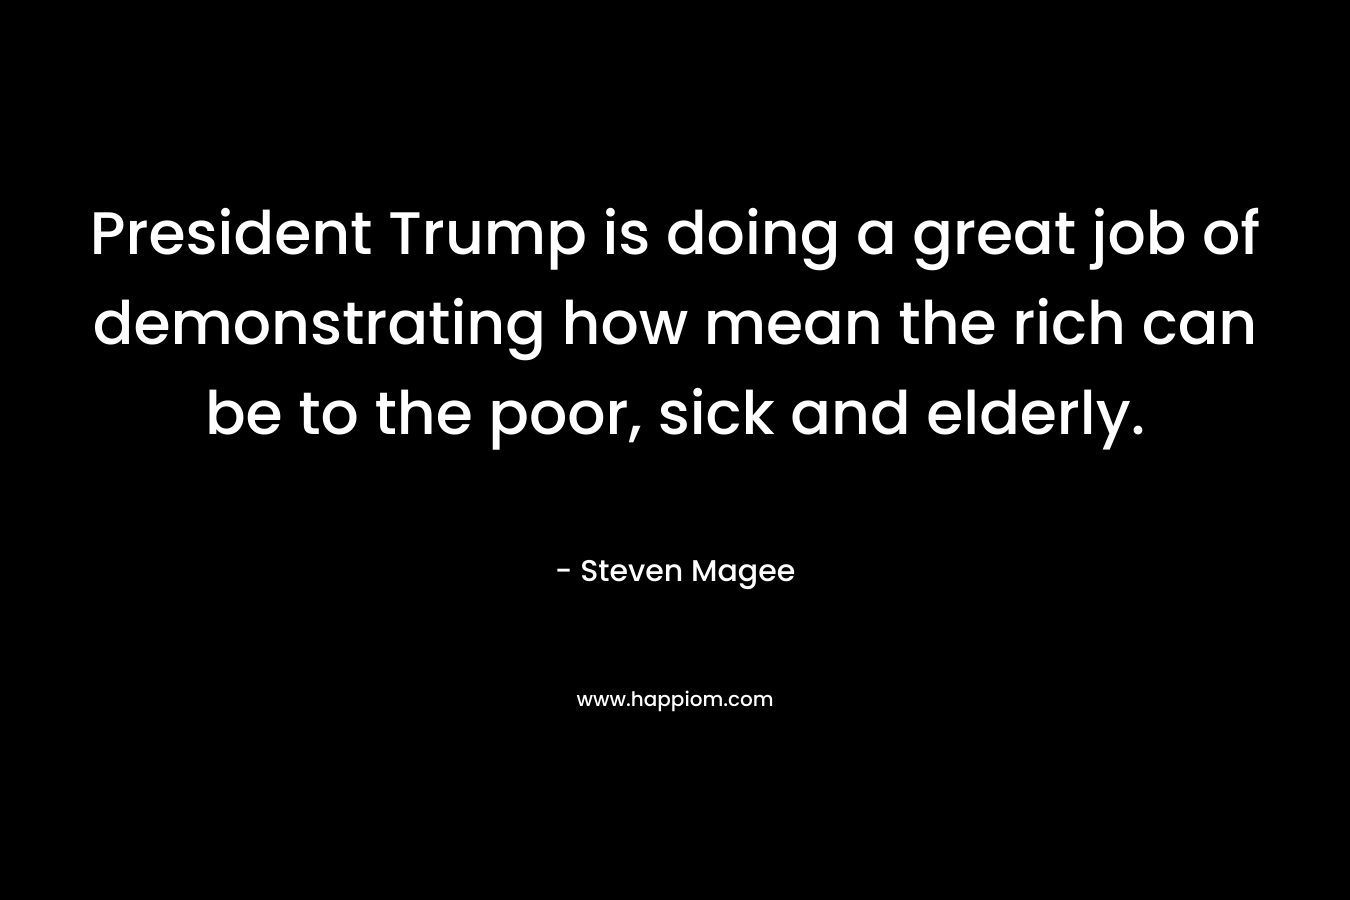 President Trump is doing a great job of demonstrating how mean the rich can be to the poor, sick and elderly.